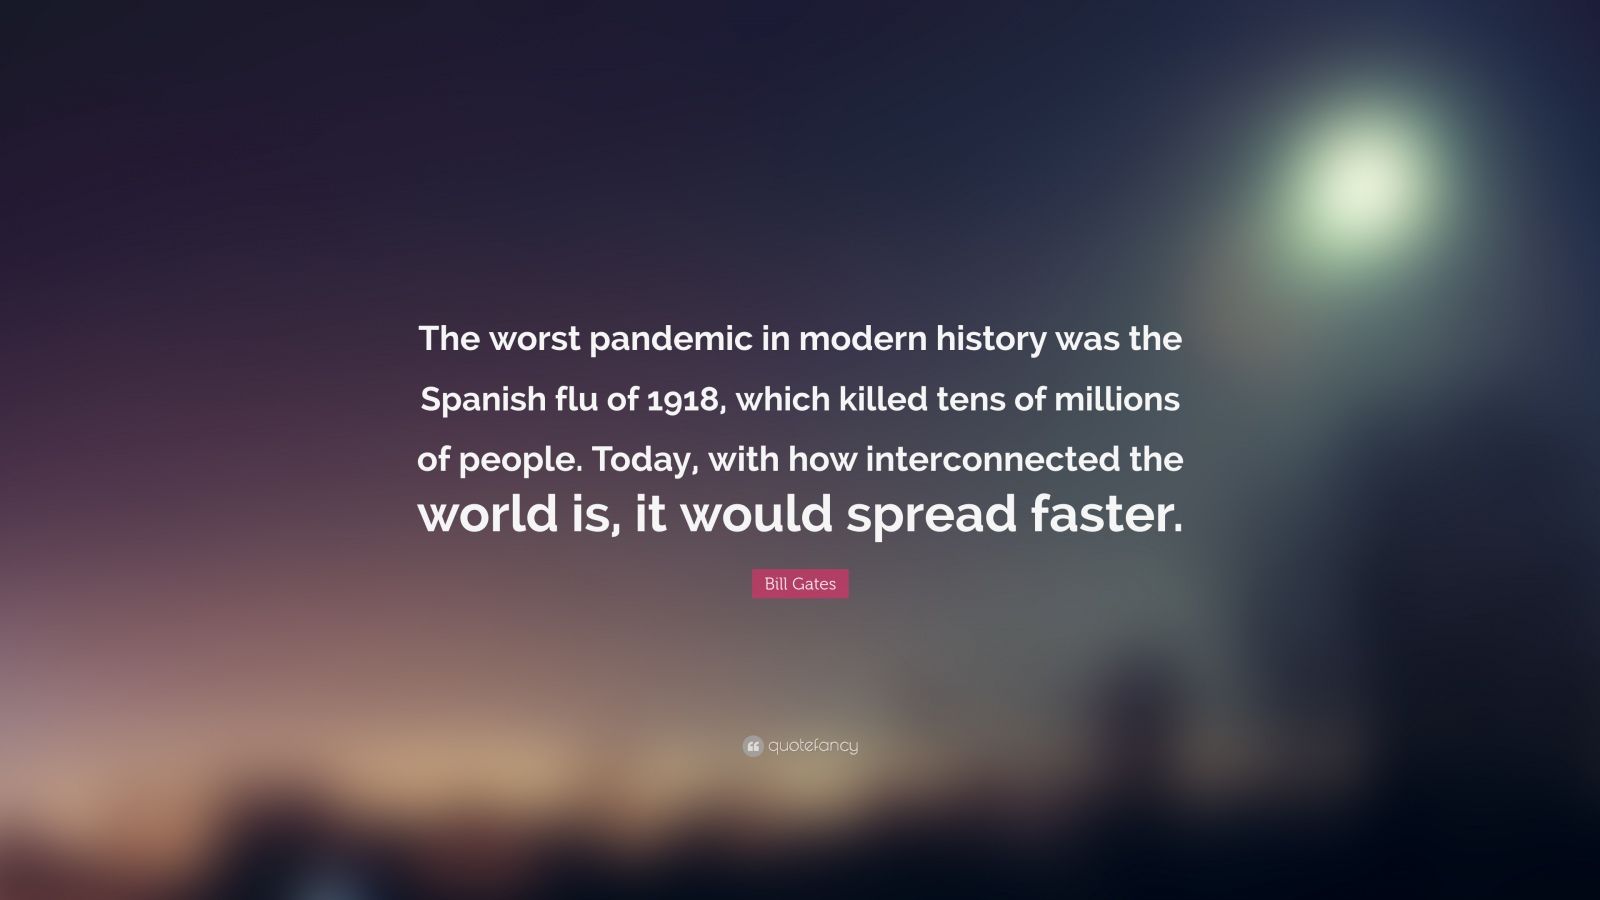 Bill Gates Quote “The worst pandemic in modern history